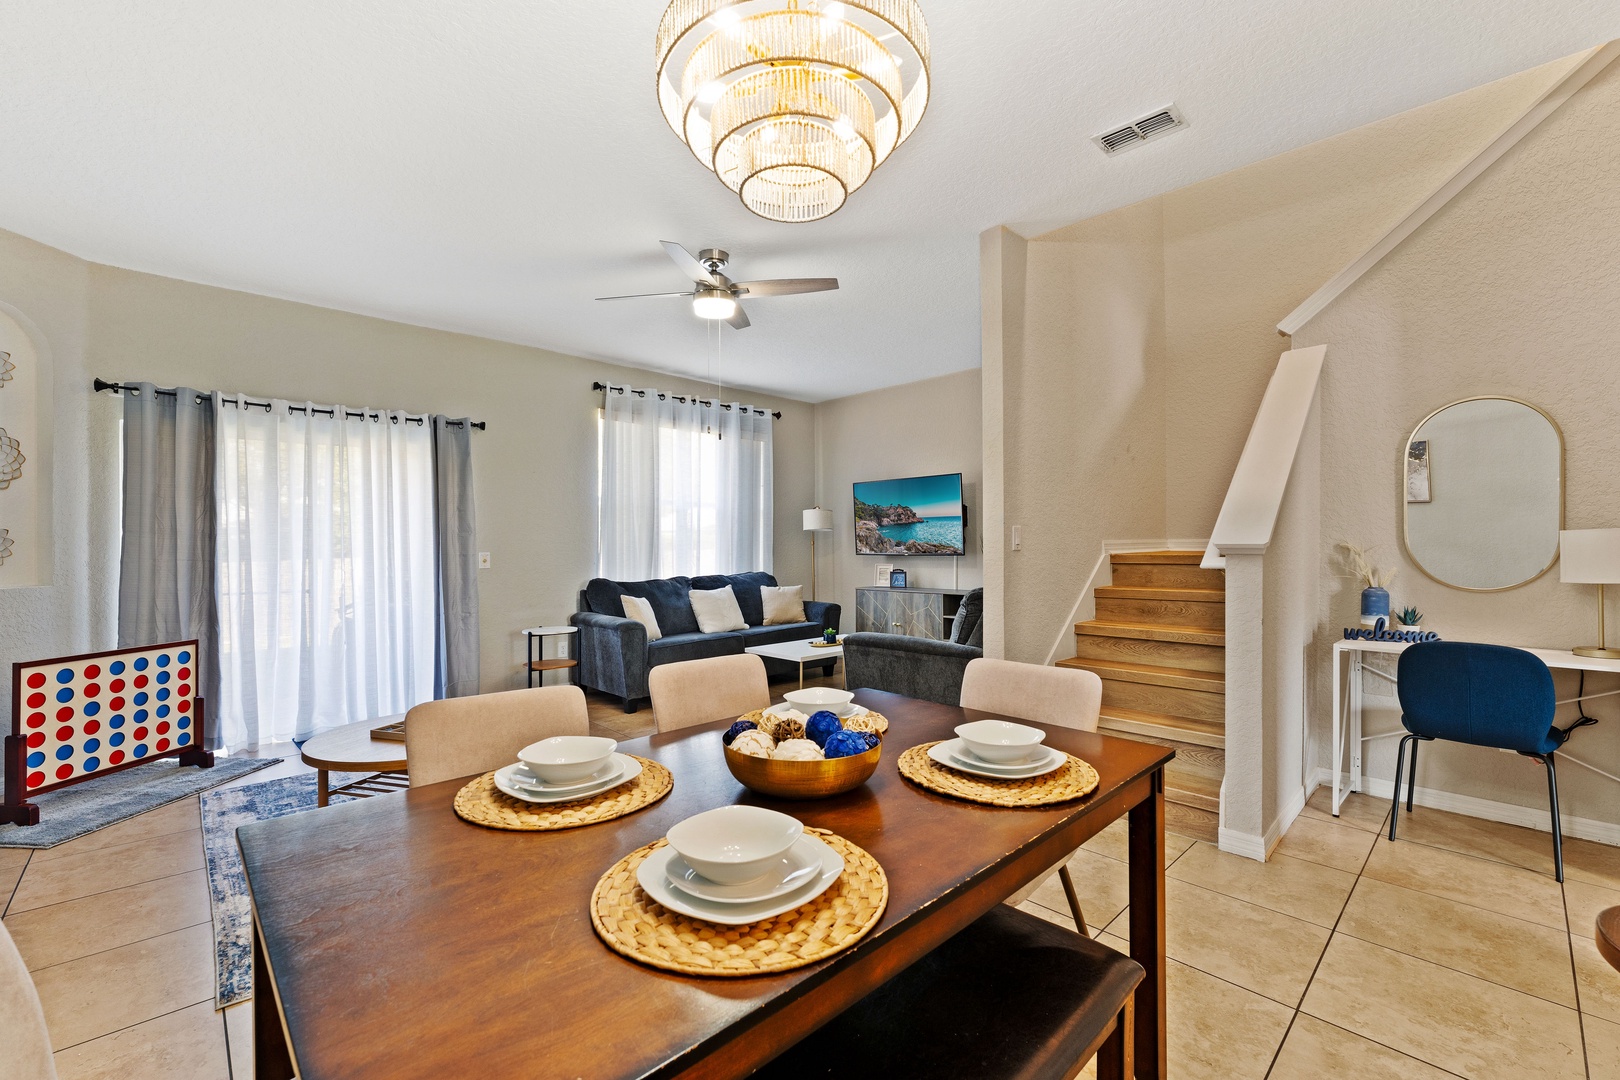 Enjoy the breezy, open layout in the main living area